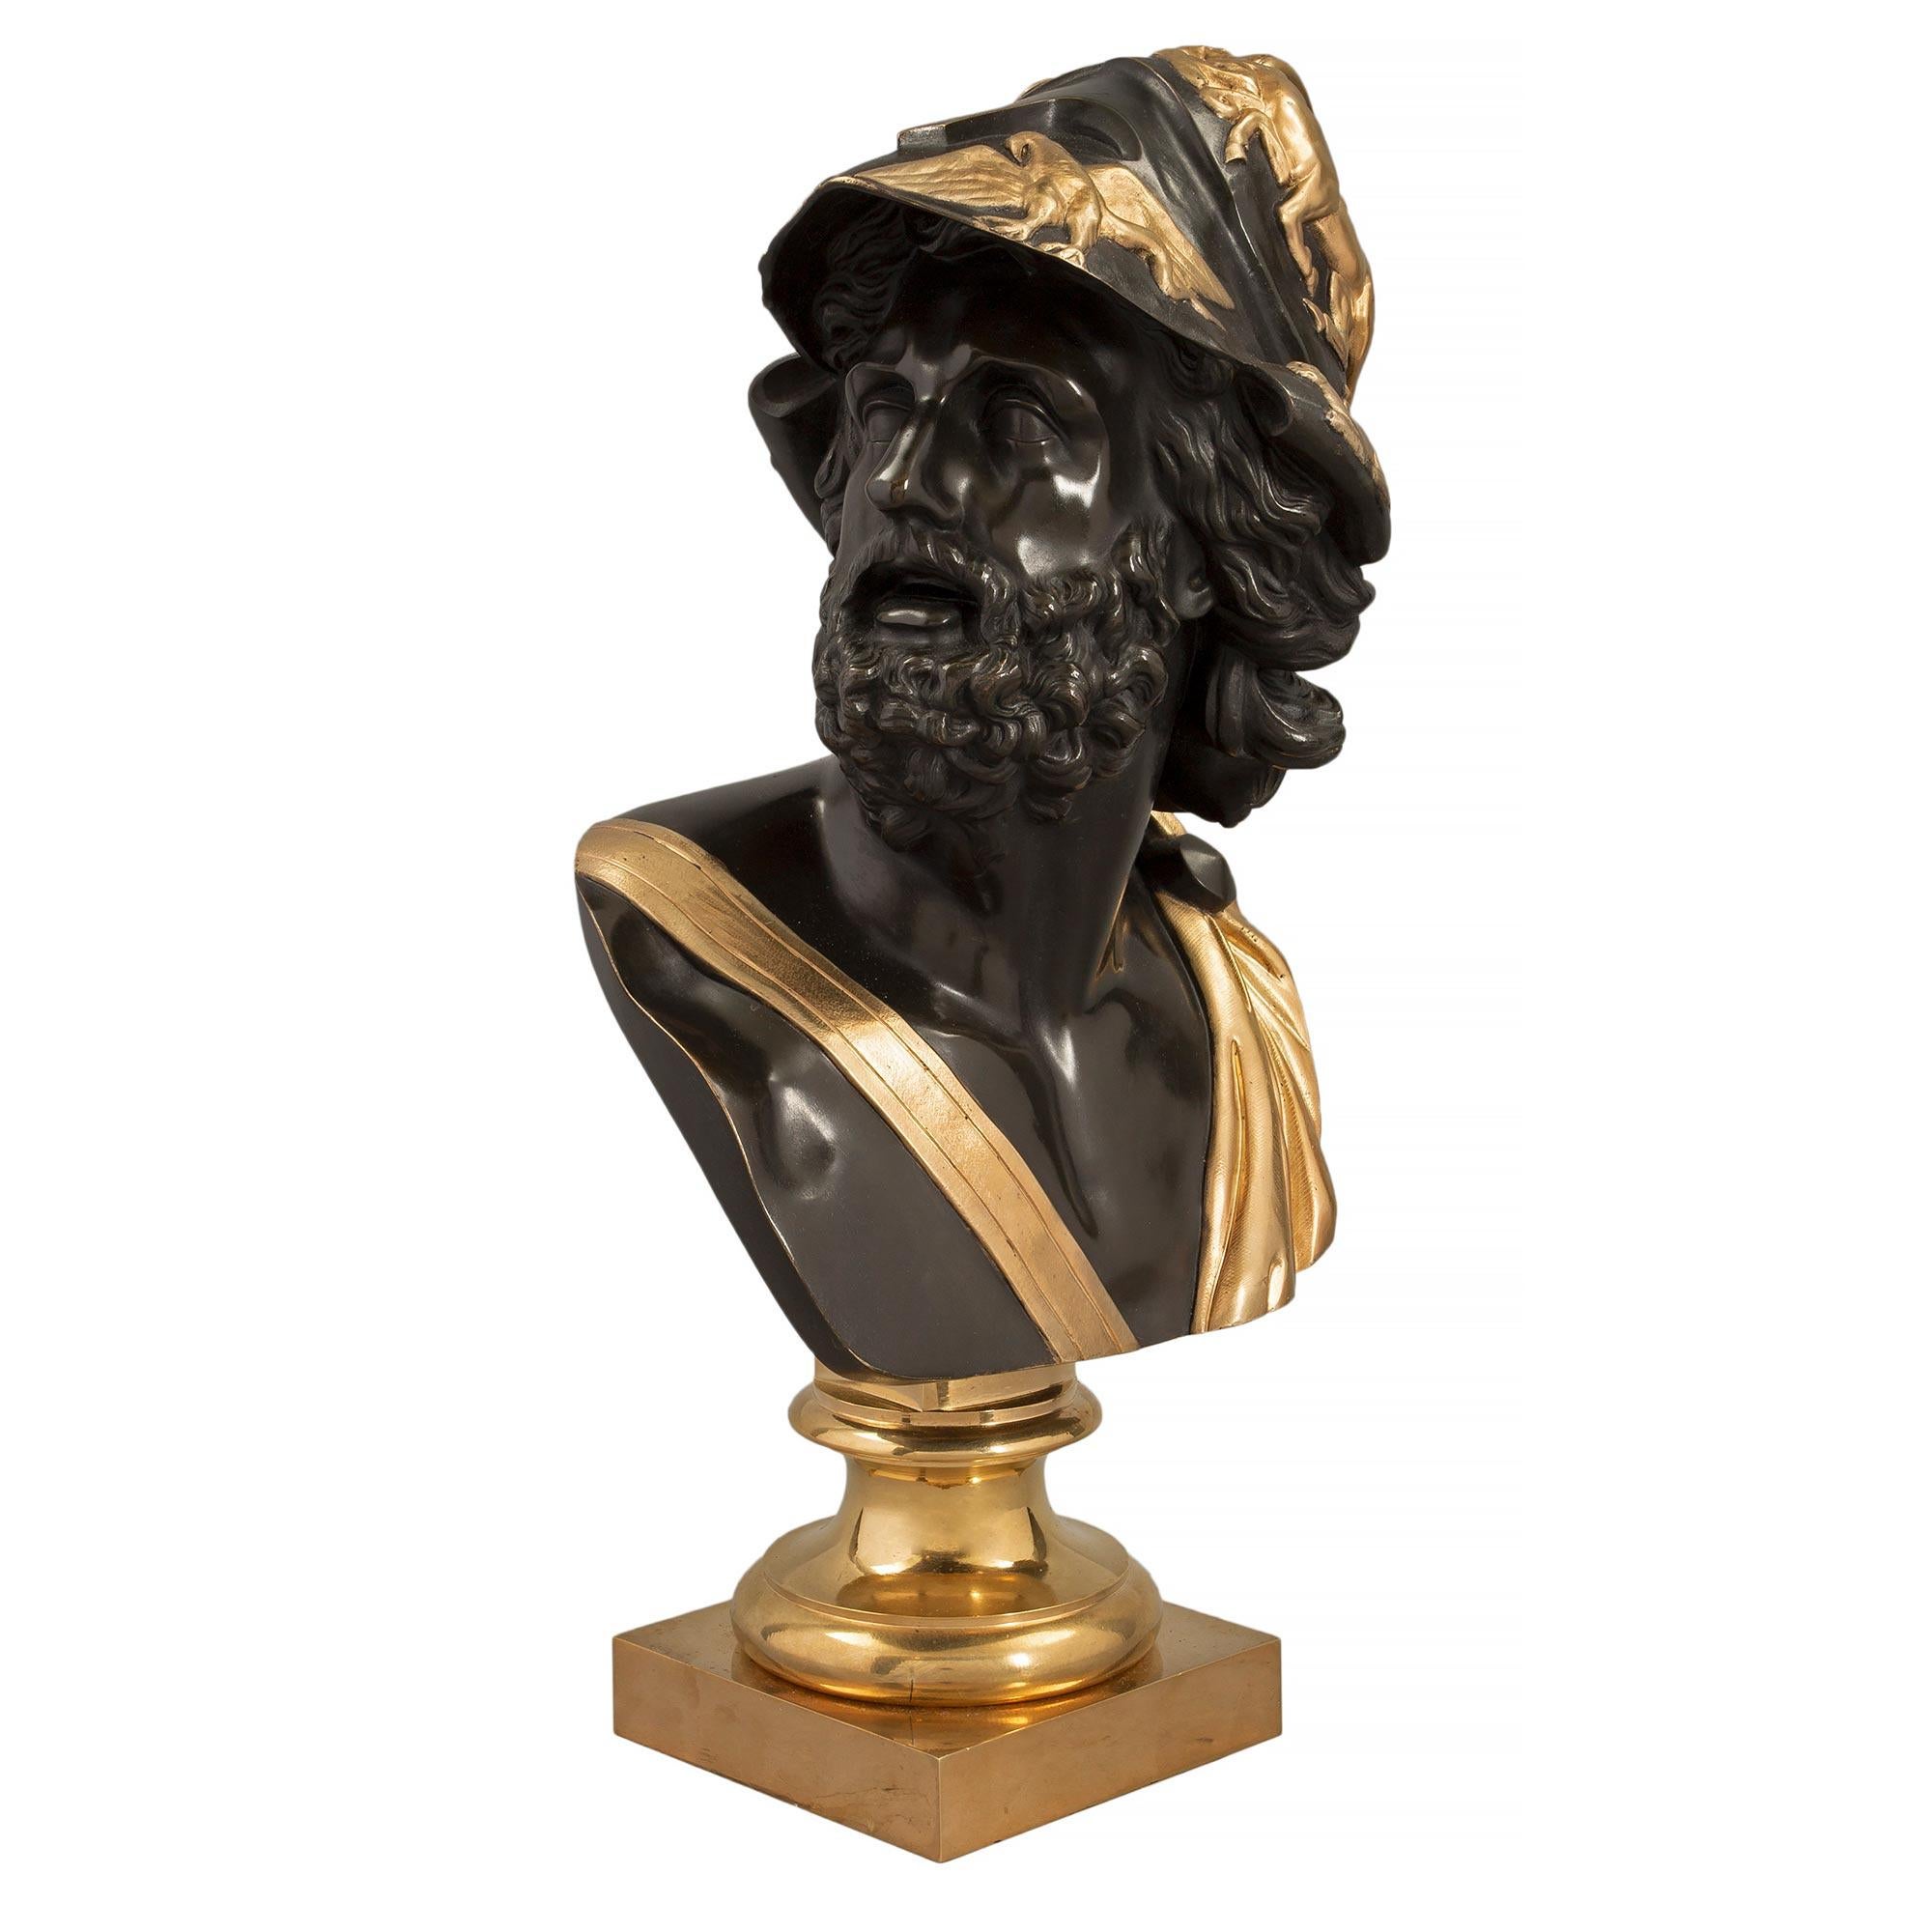 A striking French 19th century Louis XVI st. patinated bronze and ormolu bust of Menelaus. The bust is raised by a square ormolu base below a fine mottled socle pedestal. The richly chased patinated bronze soldier is draped in period attire tied at